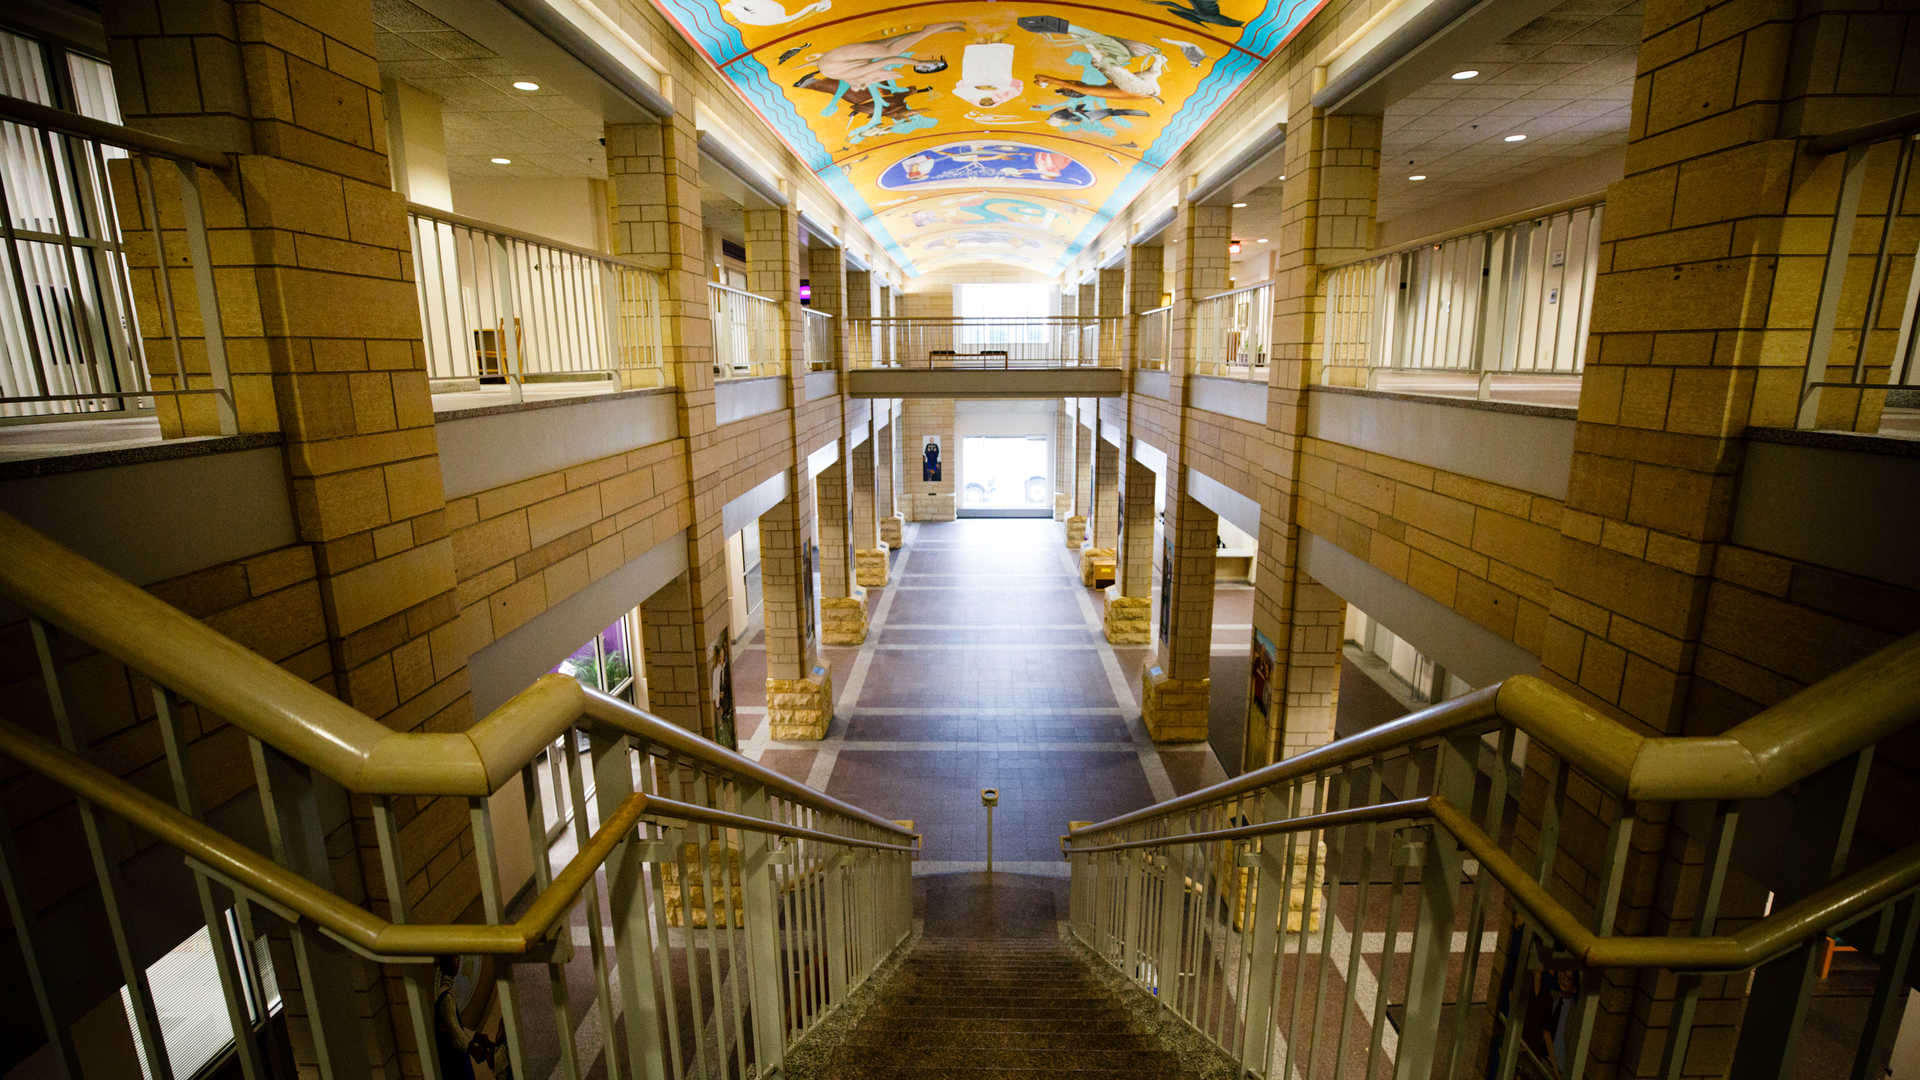  The interior of the Terrence Murphy Hall atrium